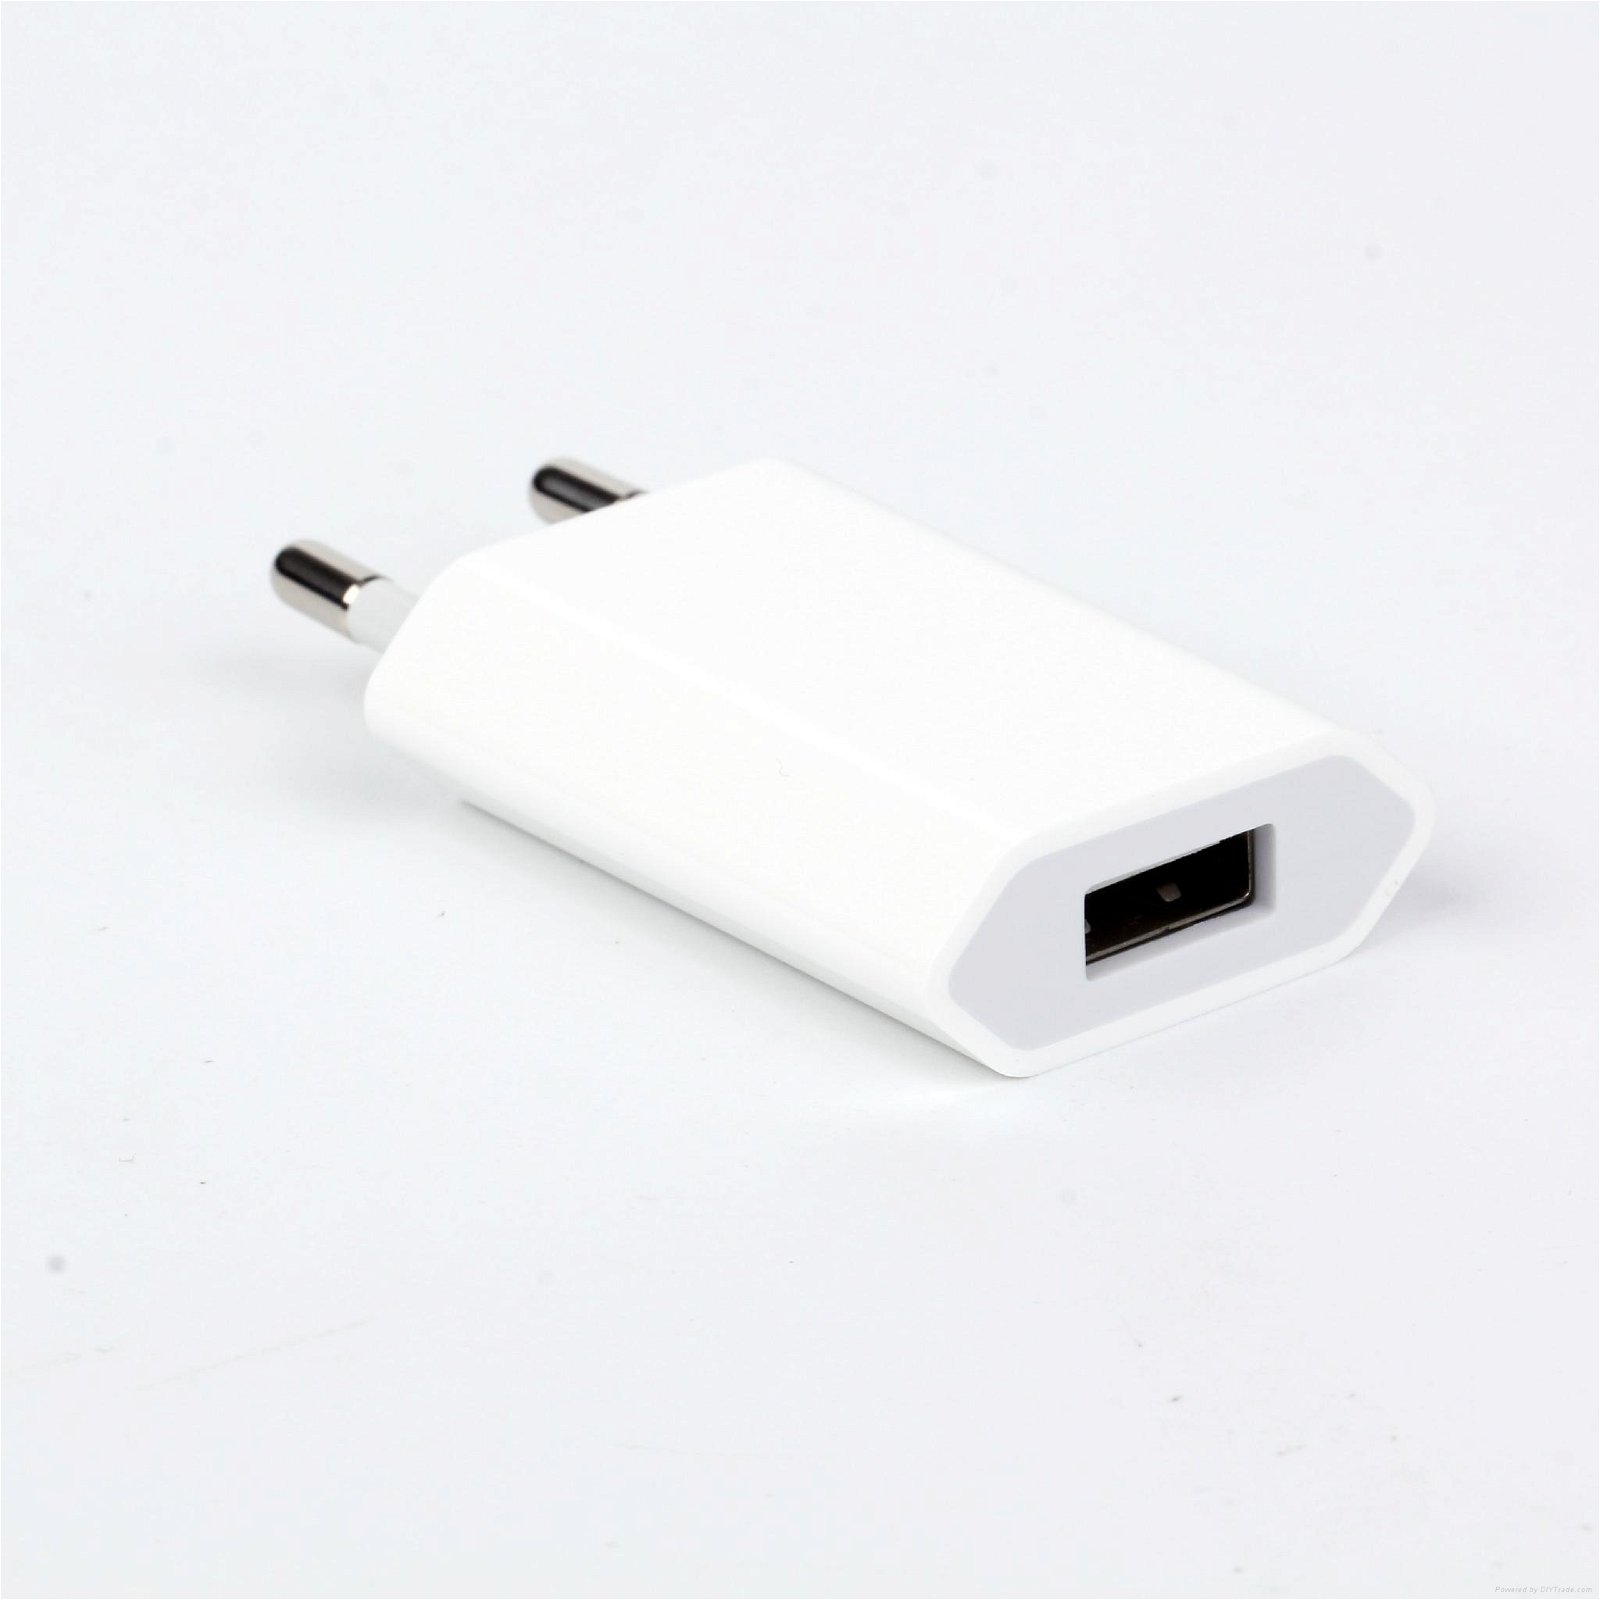 A1400 EU 2-Pin Wall Charger USB Adapter for iPhone 4